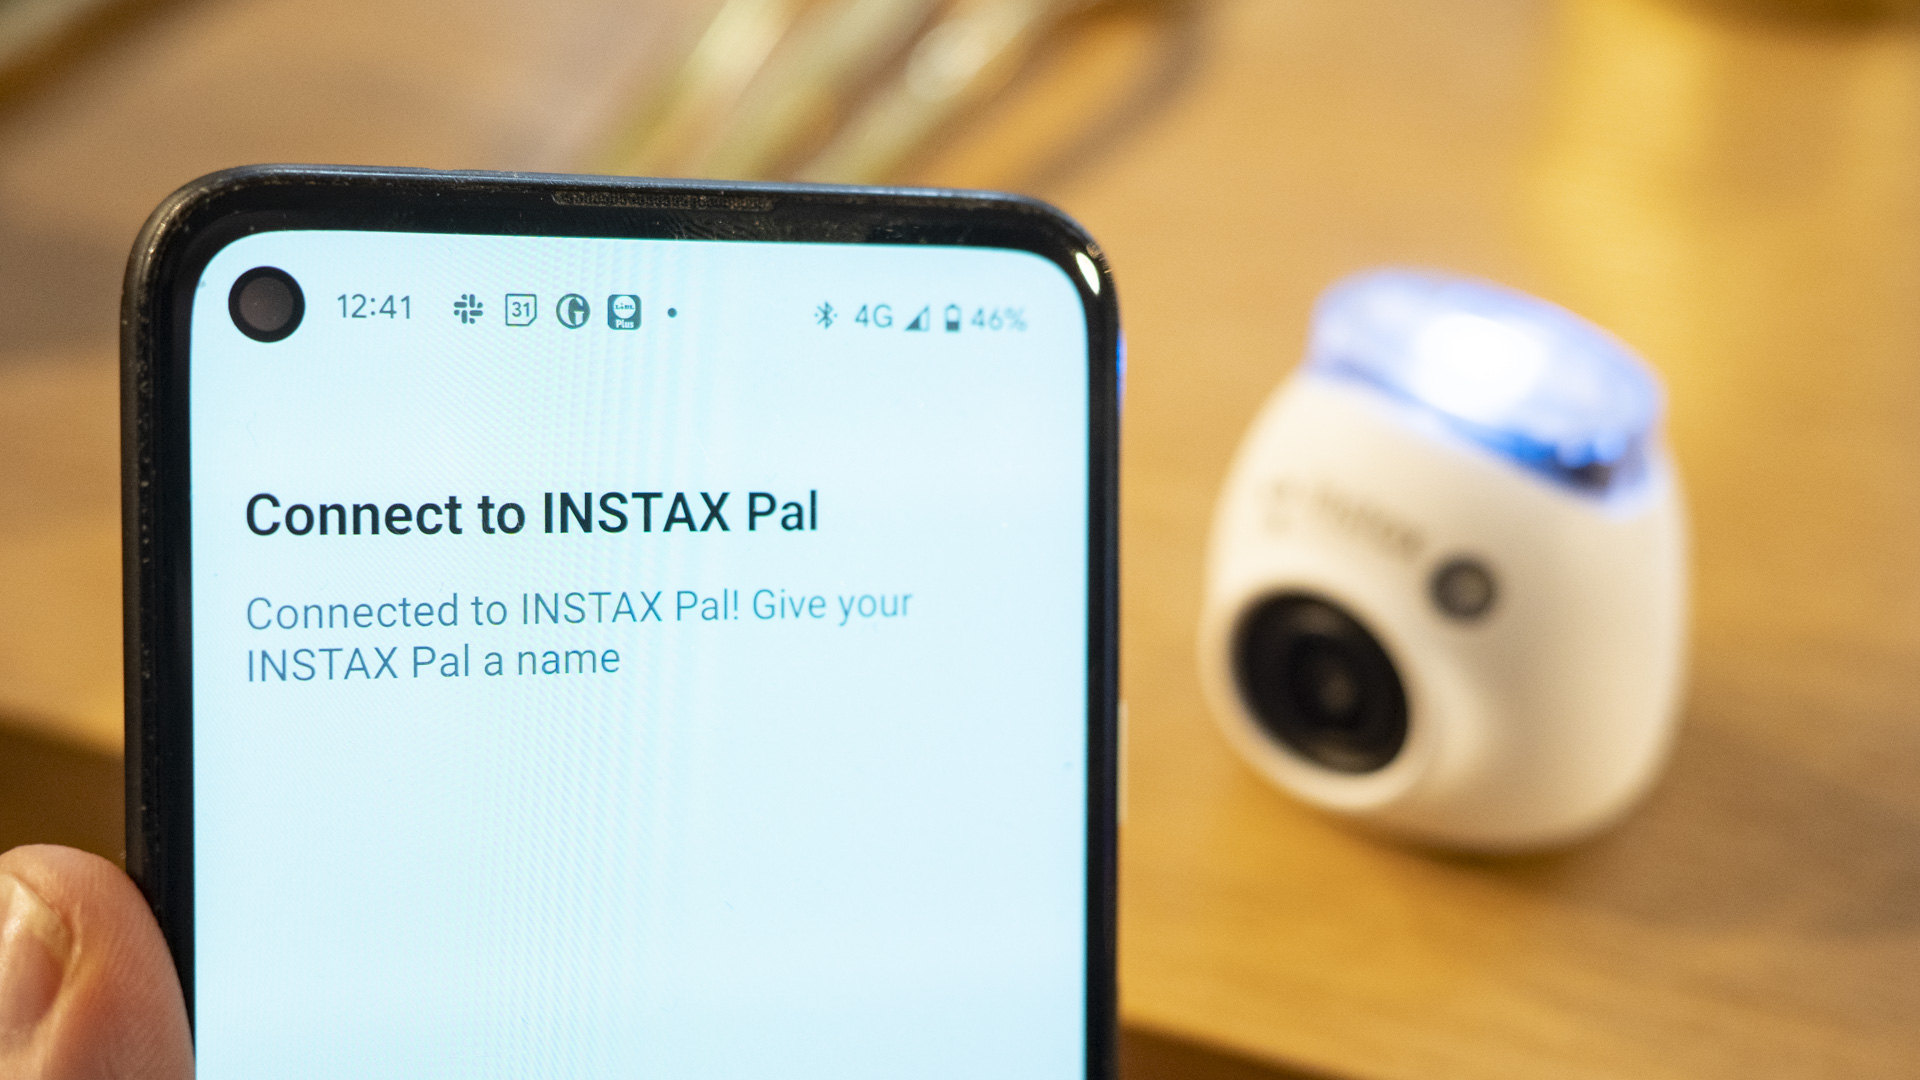 Instax Pal app device pairing process on phone display, with white Fujifilm Instax Pal in the background